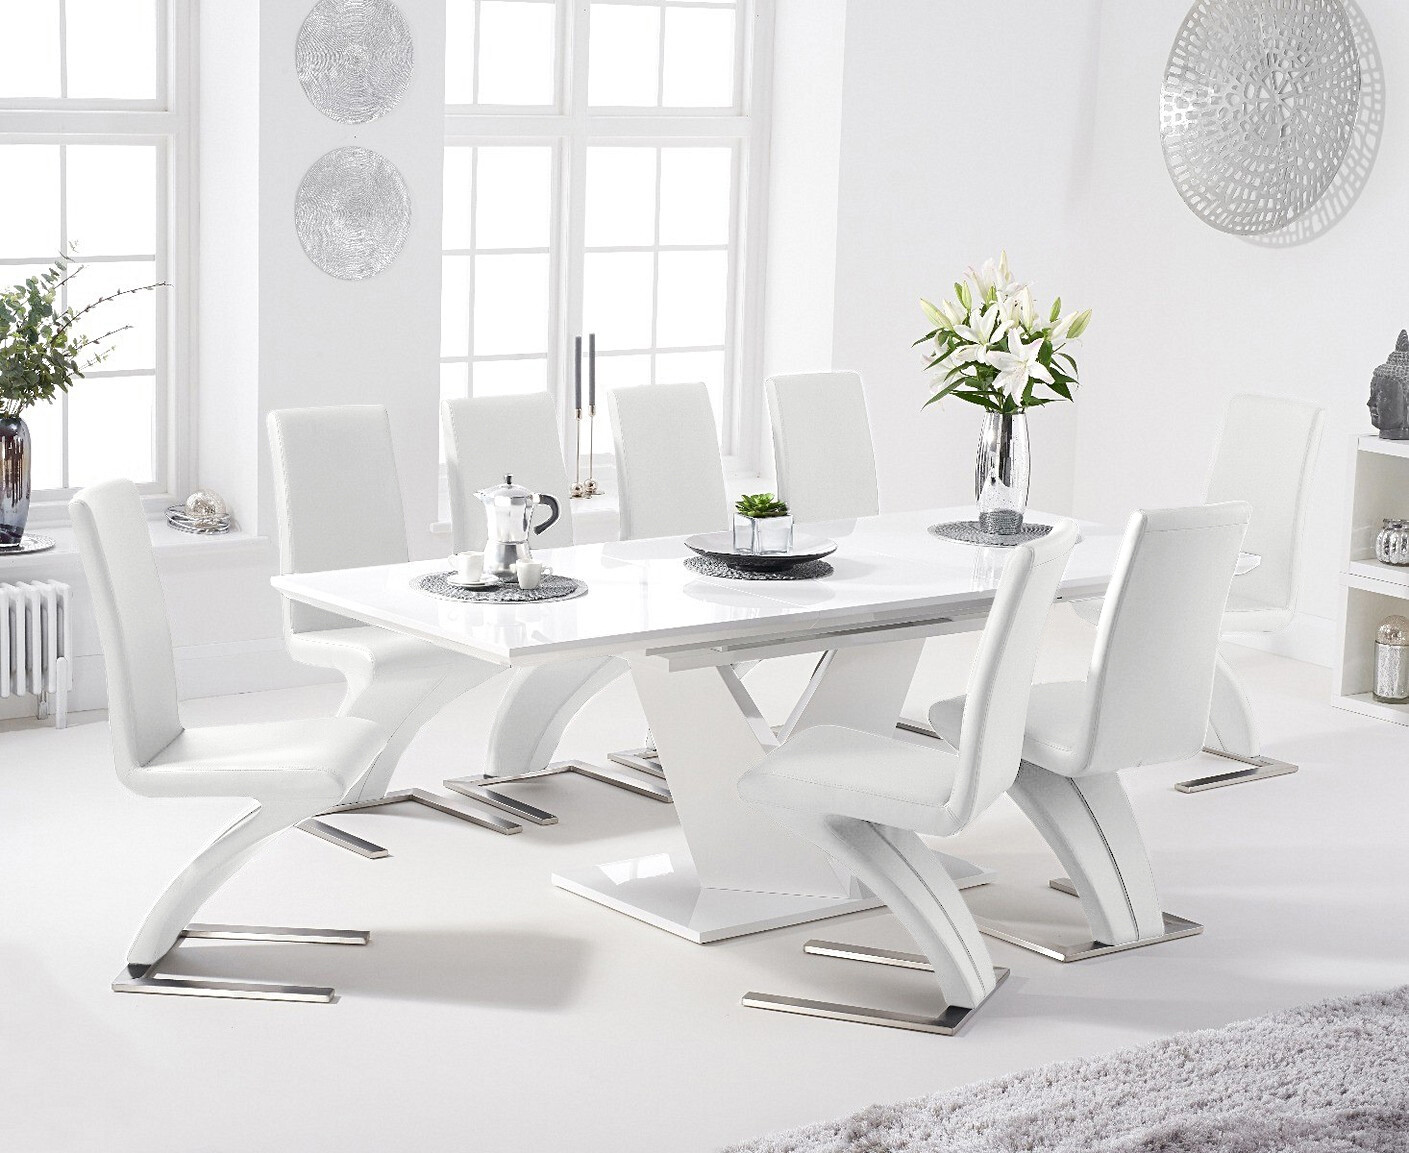 Extending Vittorio 160cm White High Gloss Dining Table With 8 White Aldo Faux Leather Chairs